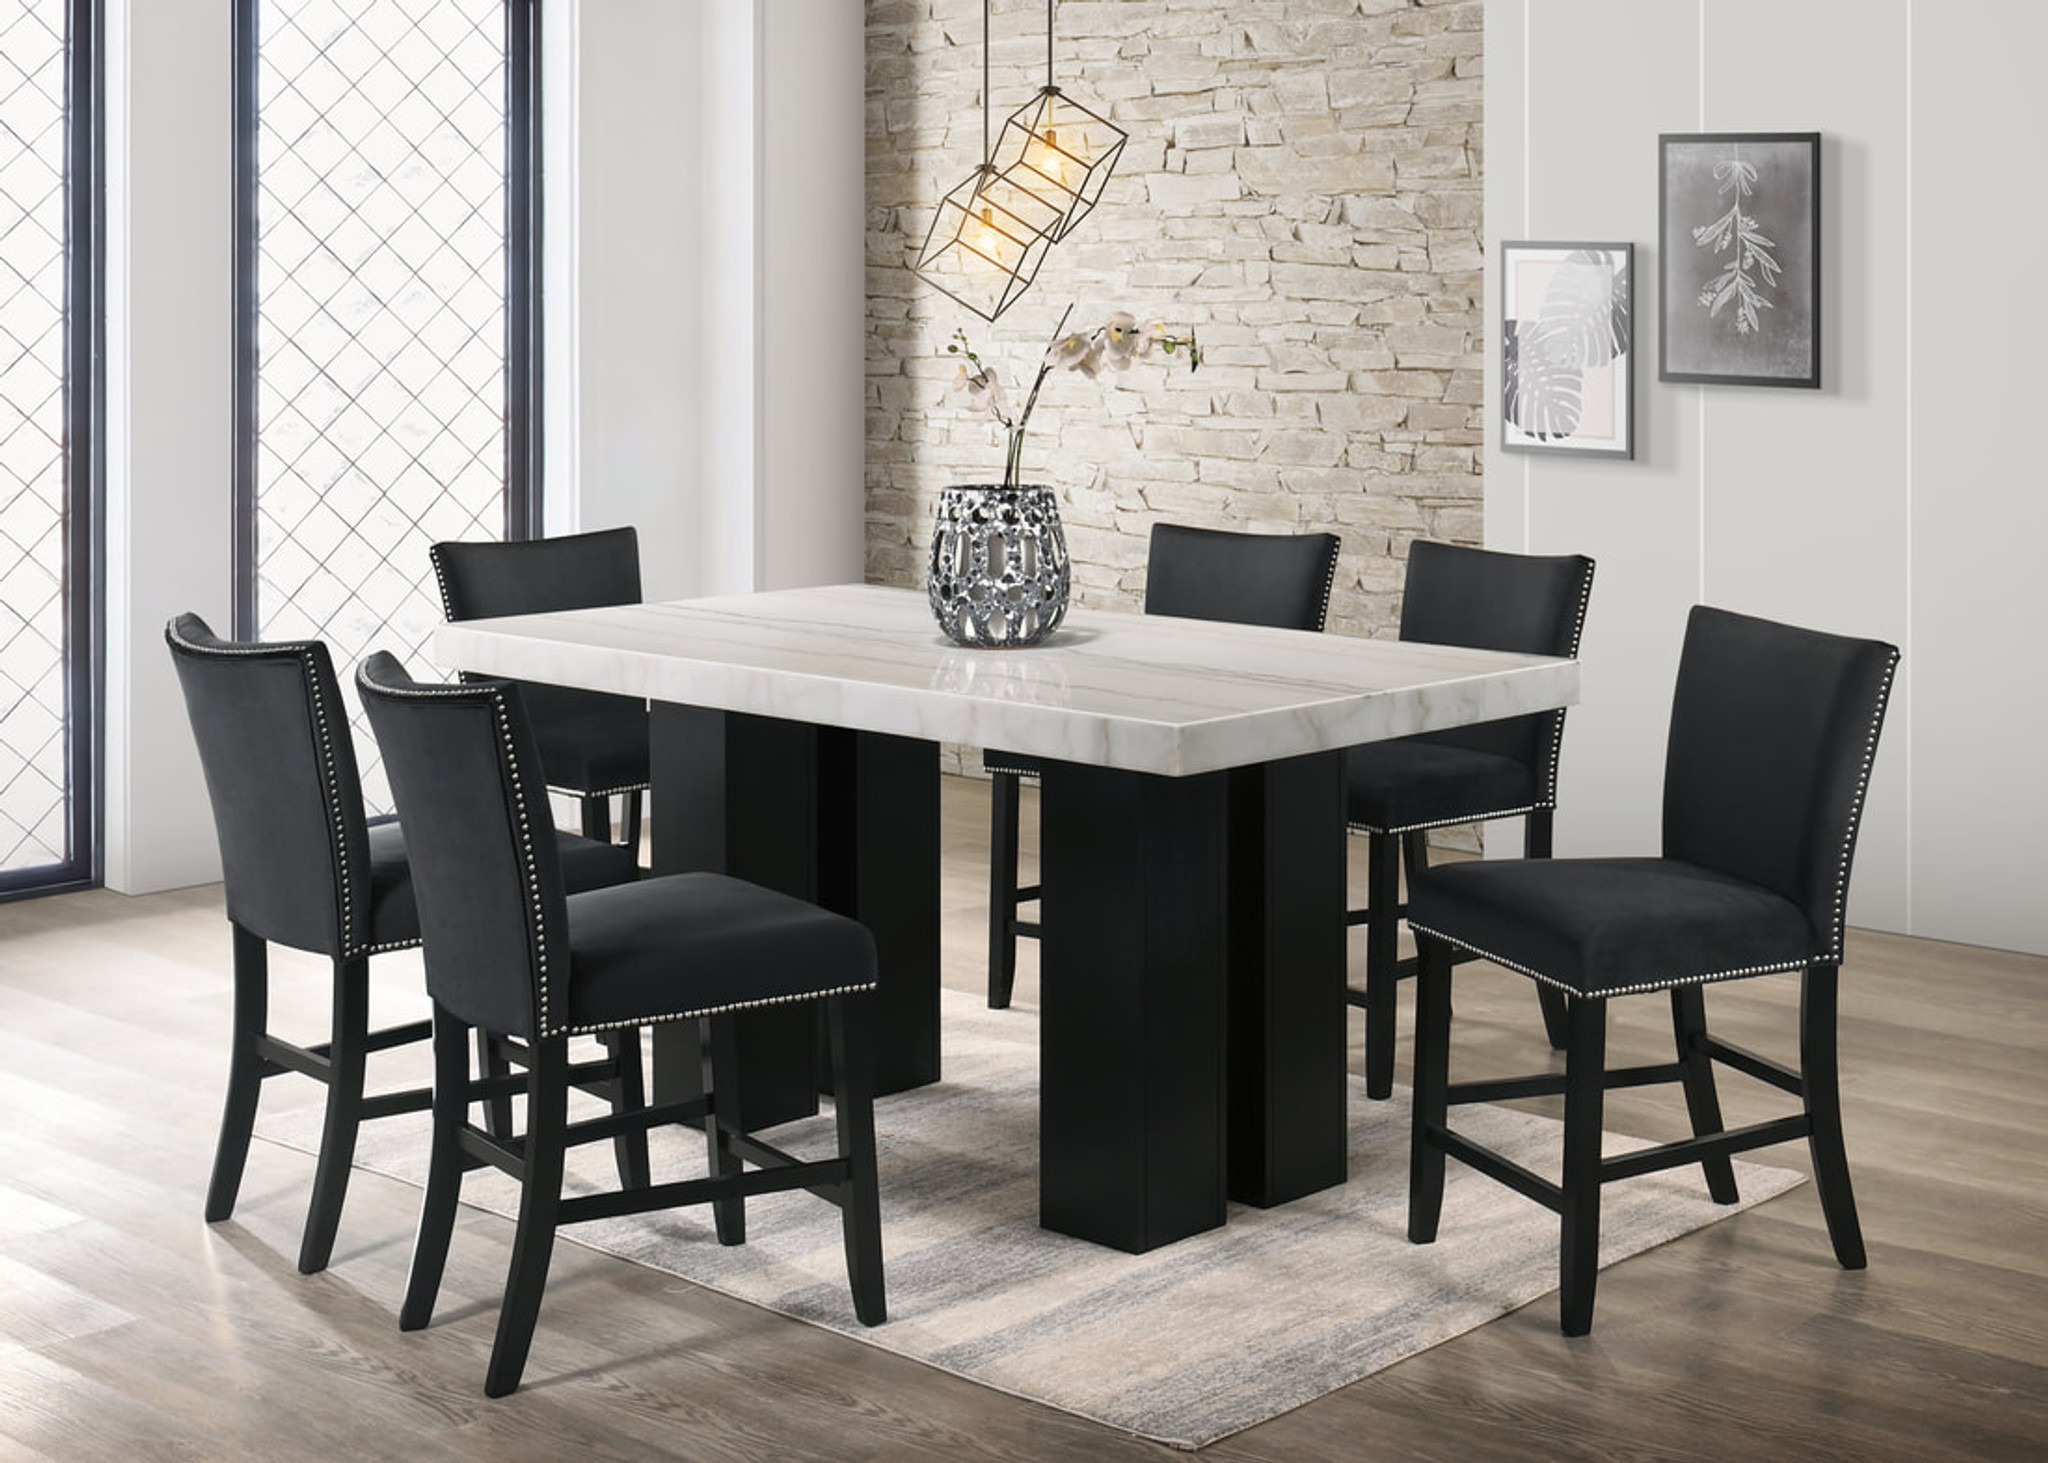 Hh Finley Black 7pc Finley Black Counter Height Dining Table Set By Happy Home Industries Houston Texas